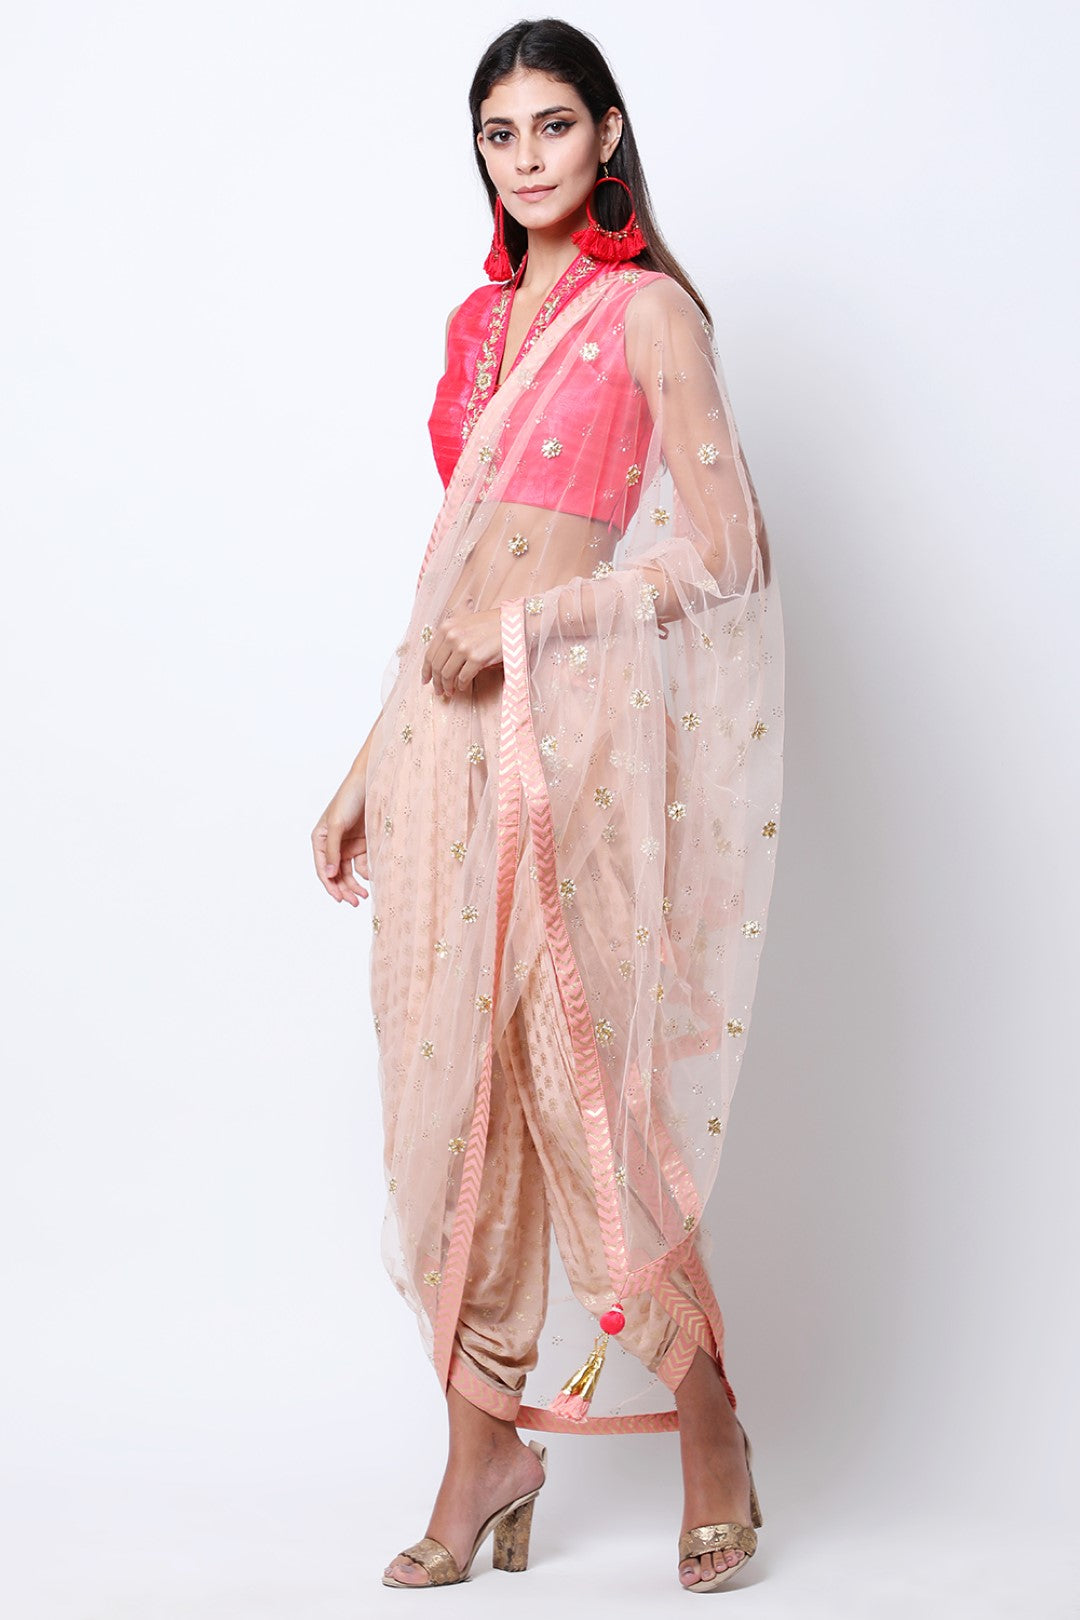 Light Tabacco lotus gold printed dhoti with attached dupatta  with blouse.